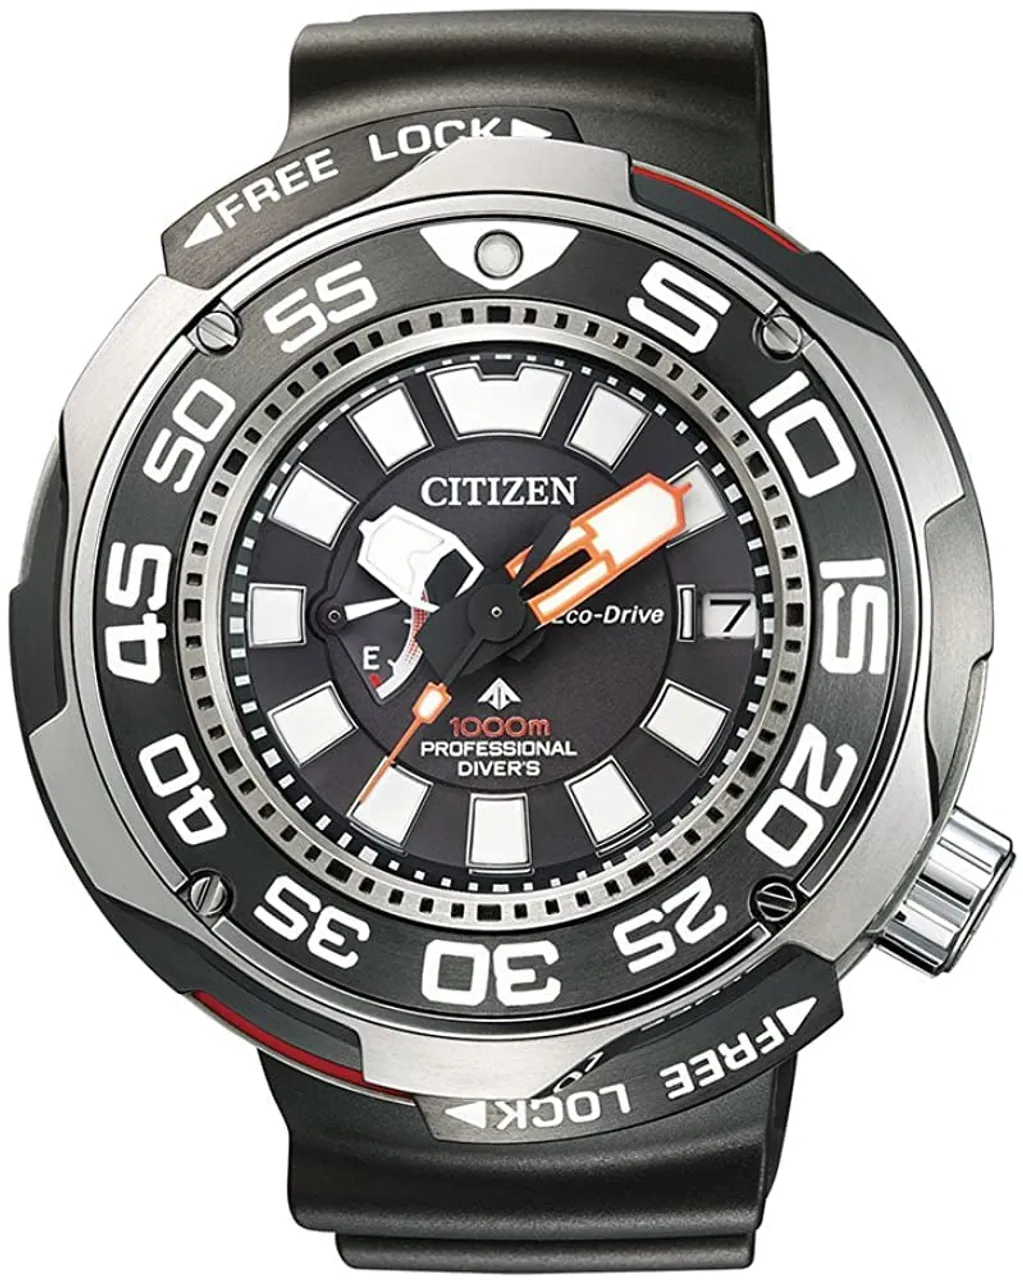 Citizen Men Analogue Eco-Drive Watch with Rubber Strap